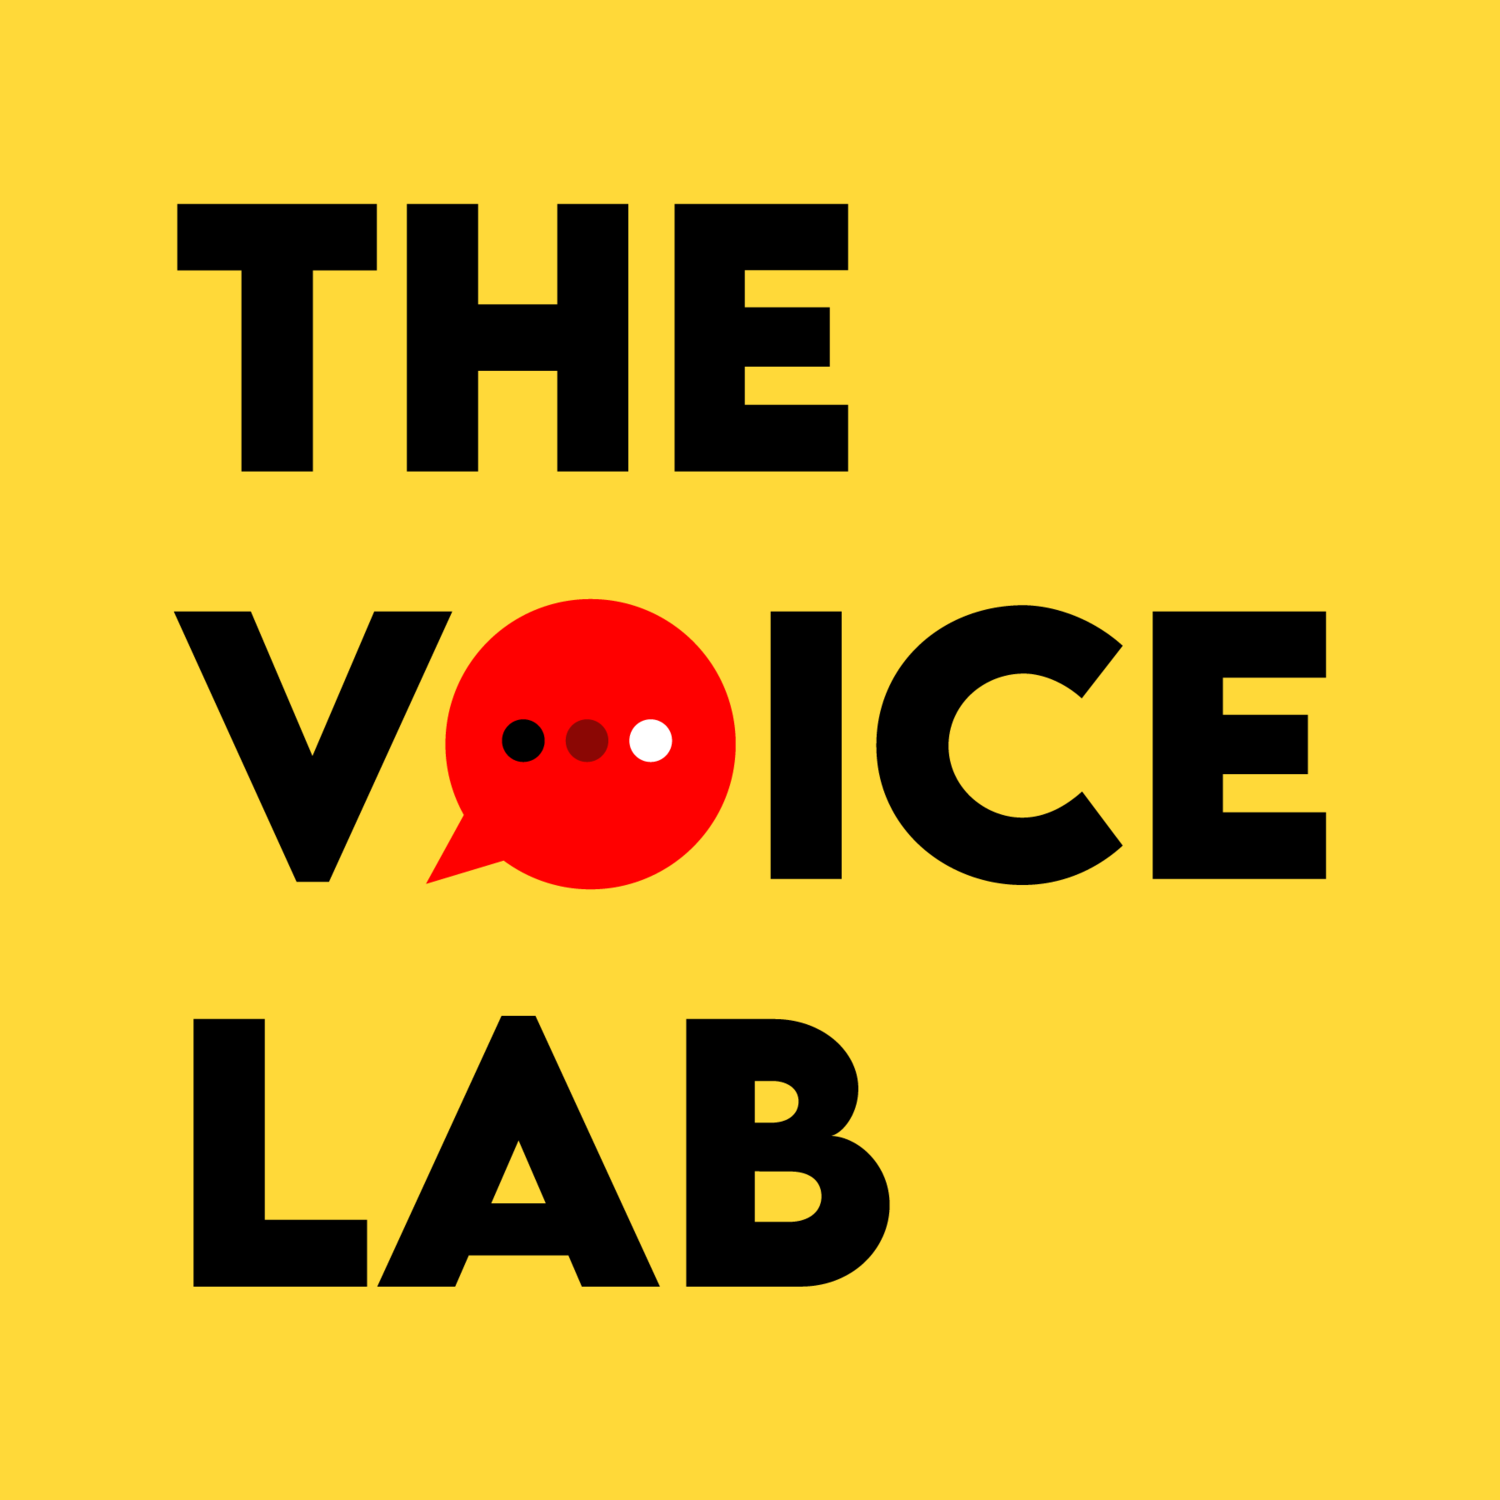 The VoiceLab